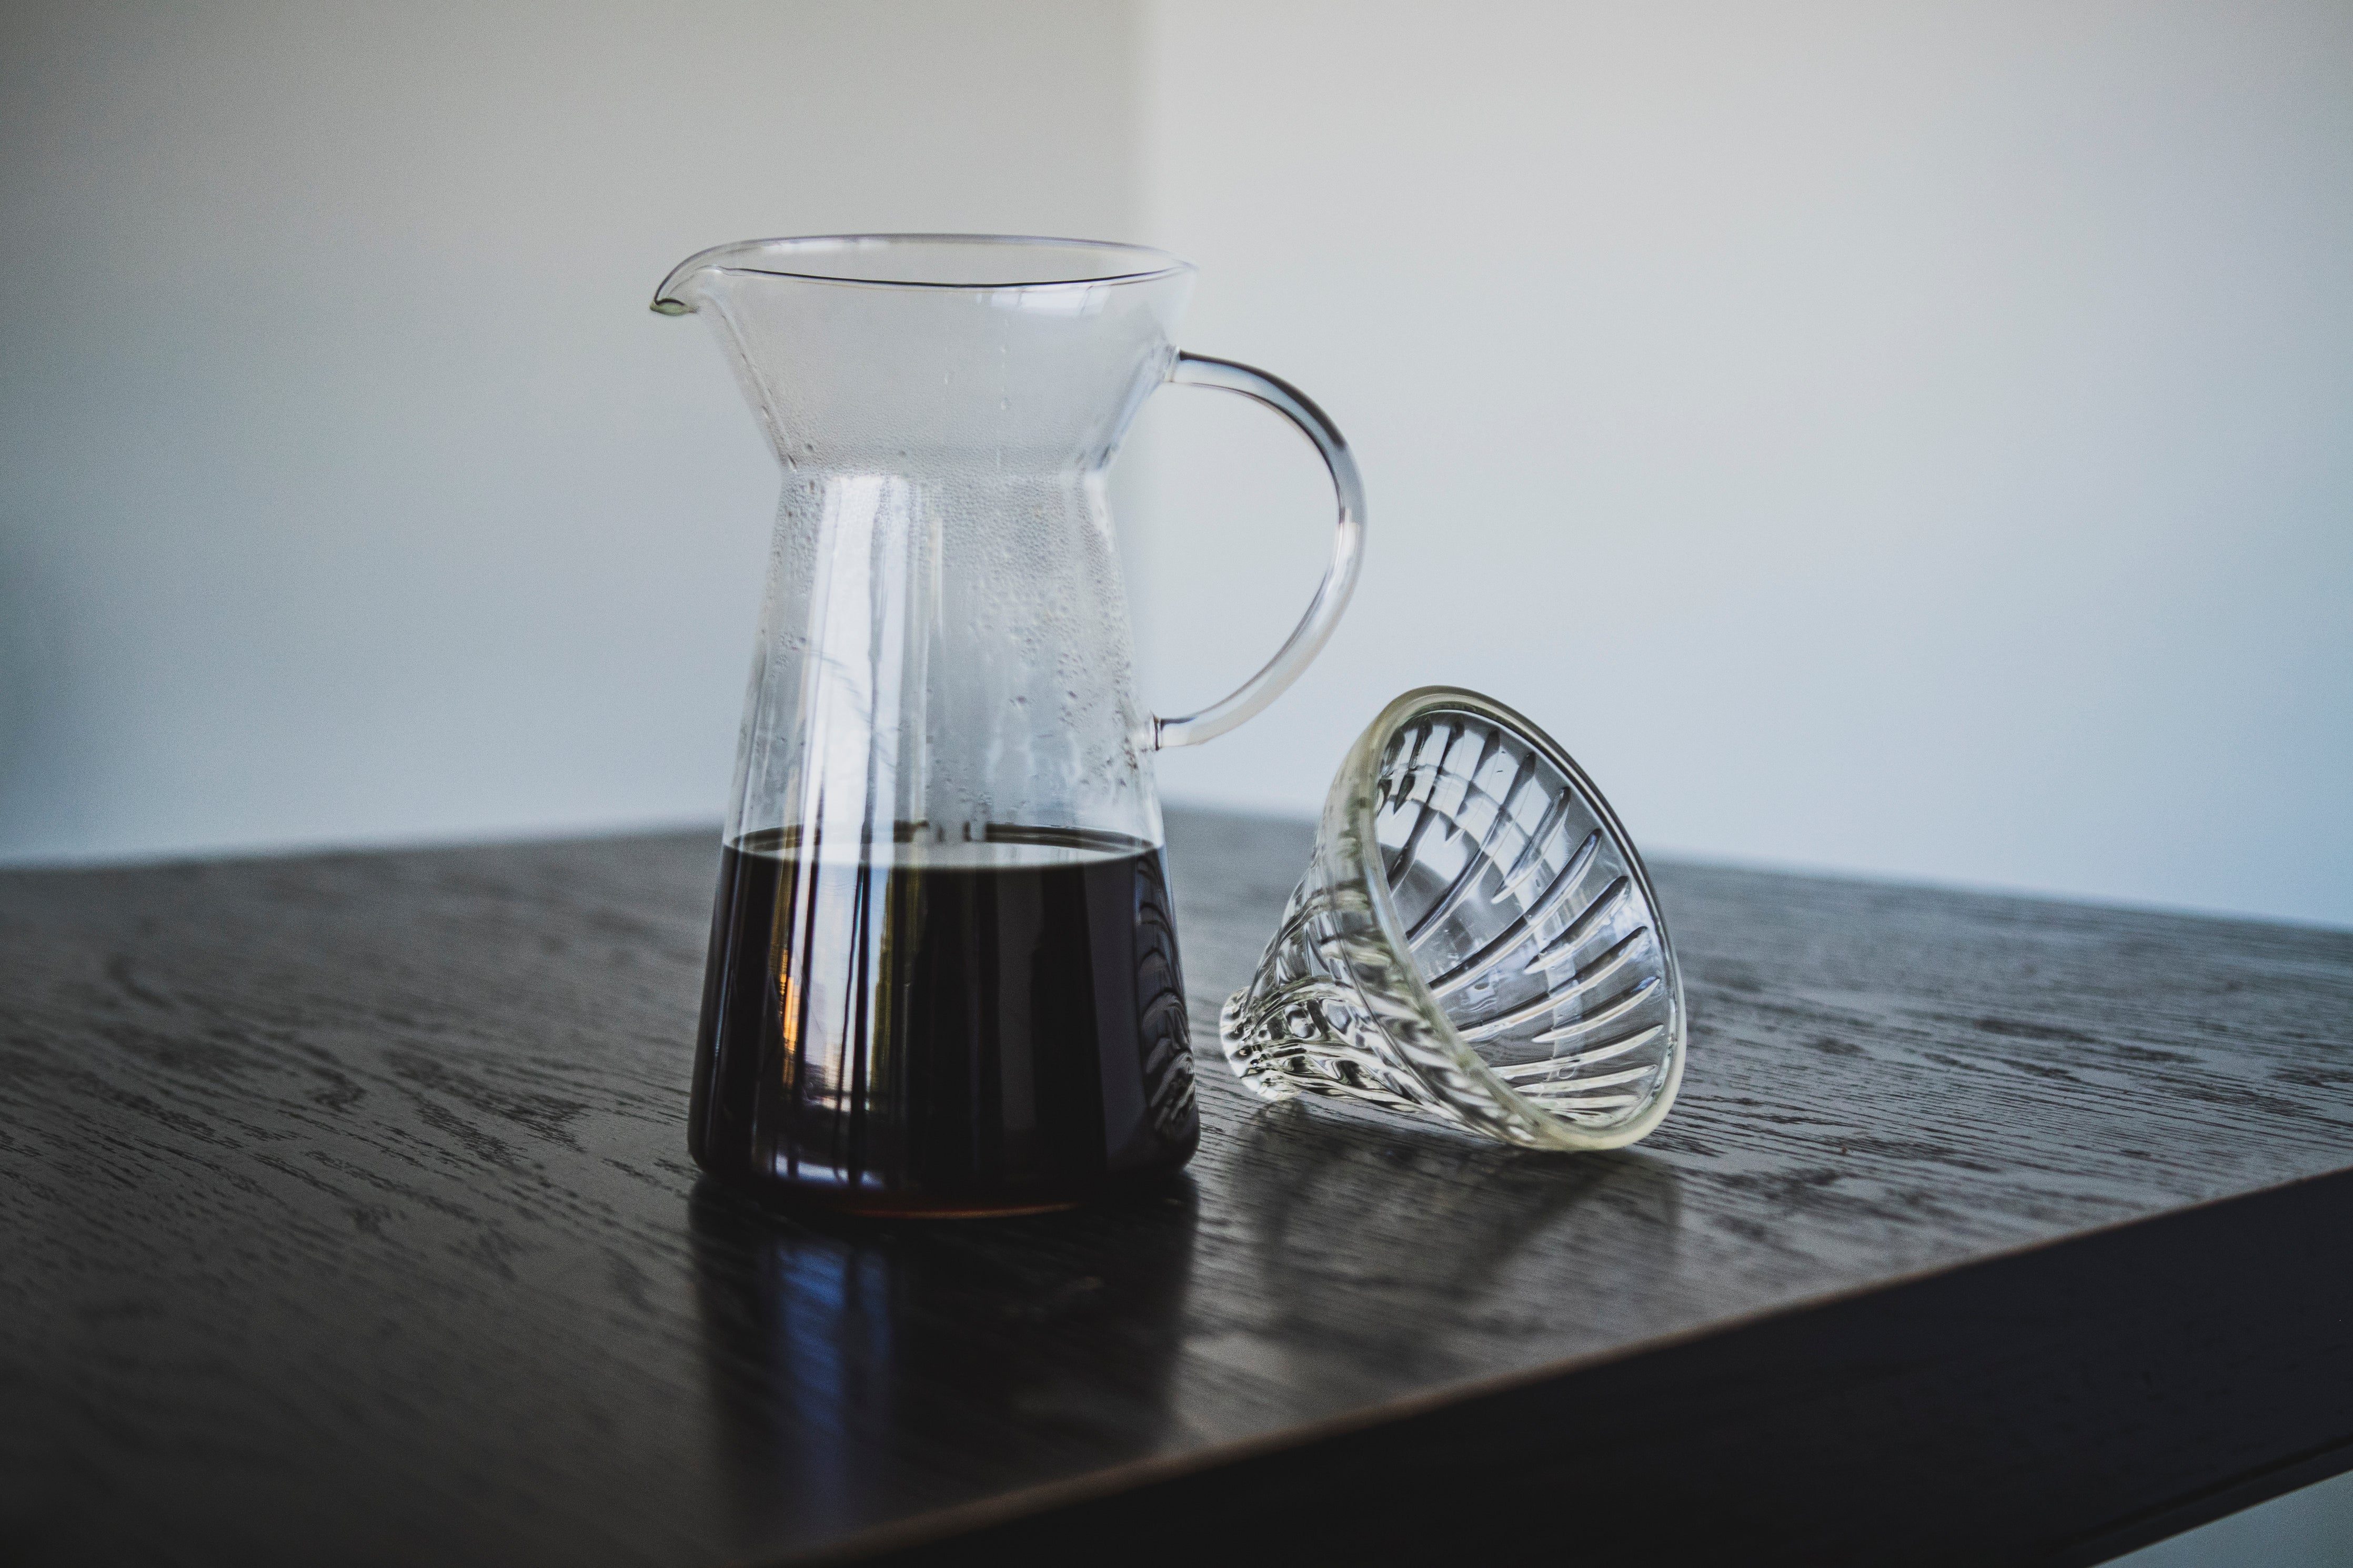 Coffee Dripper Filter, Conical Glass Pour-over Coffee Dripper